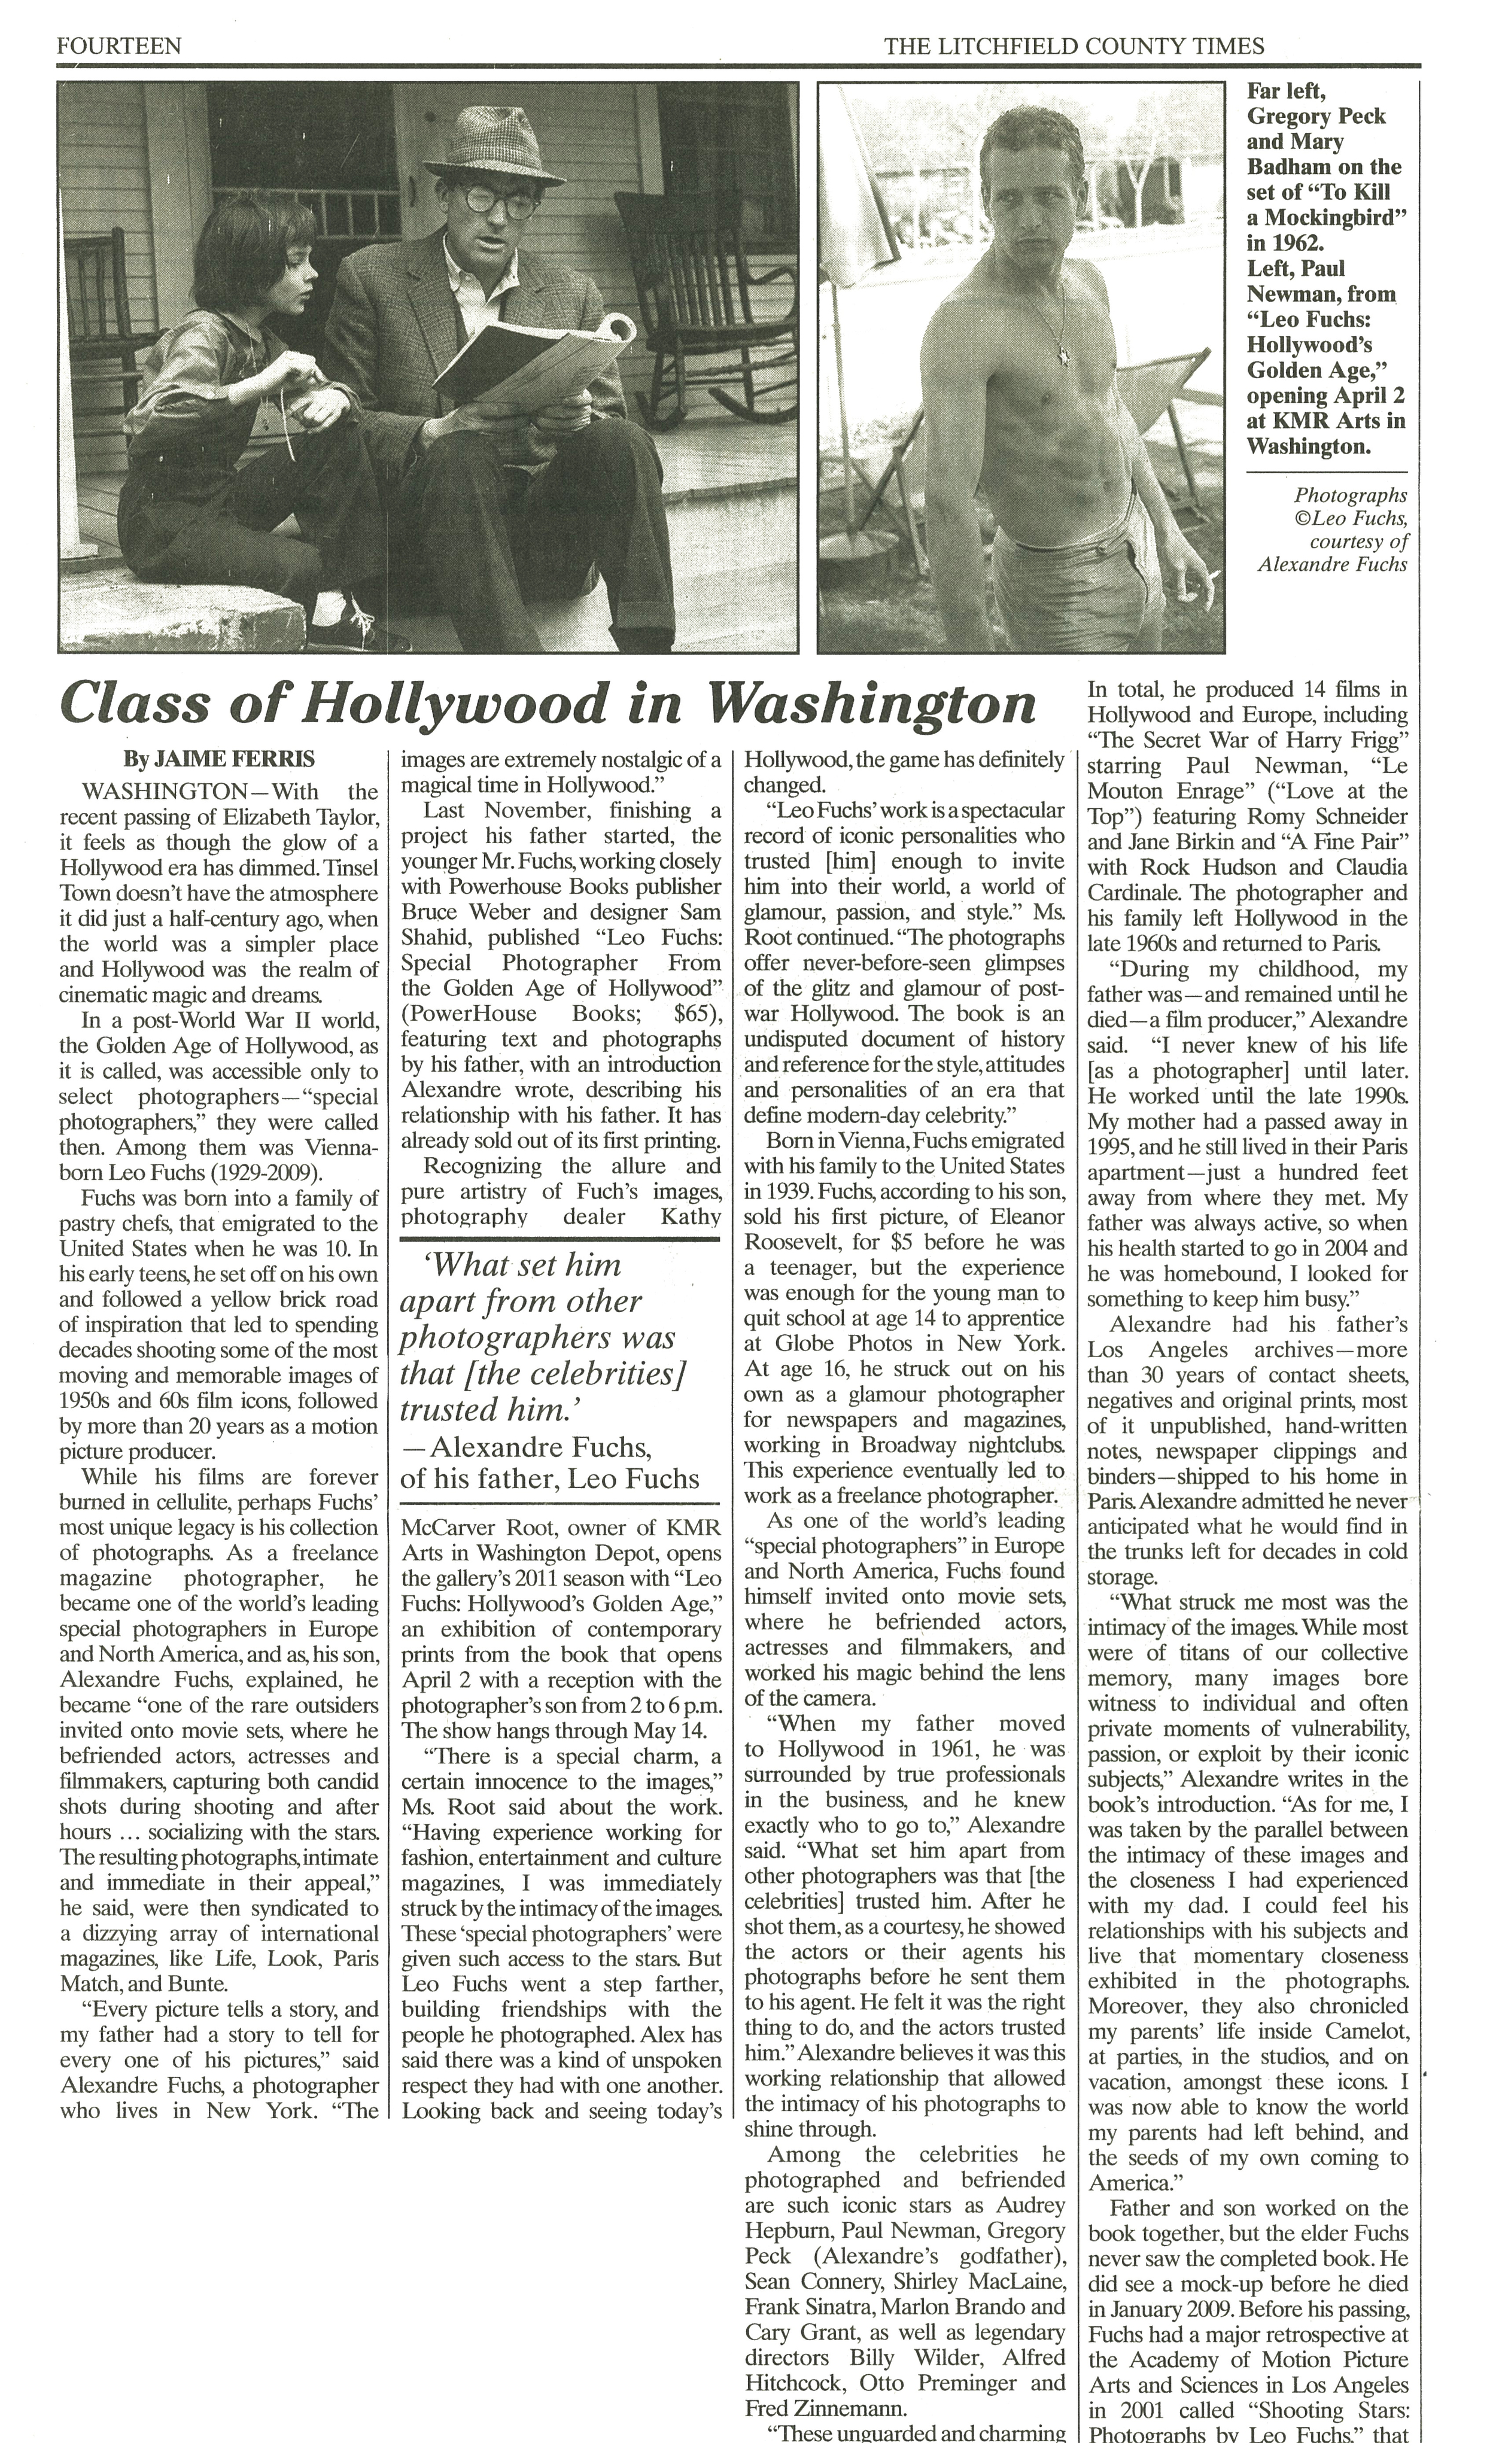 Class Of Hollywood in Washington. April 1, 2011 Litchfield County Times.jpg